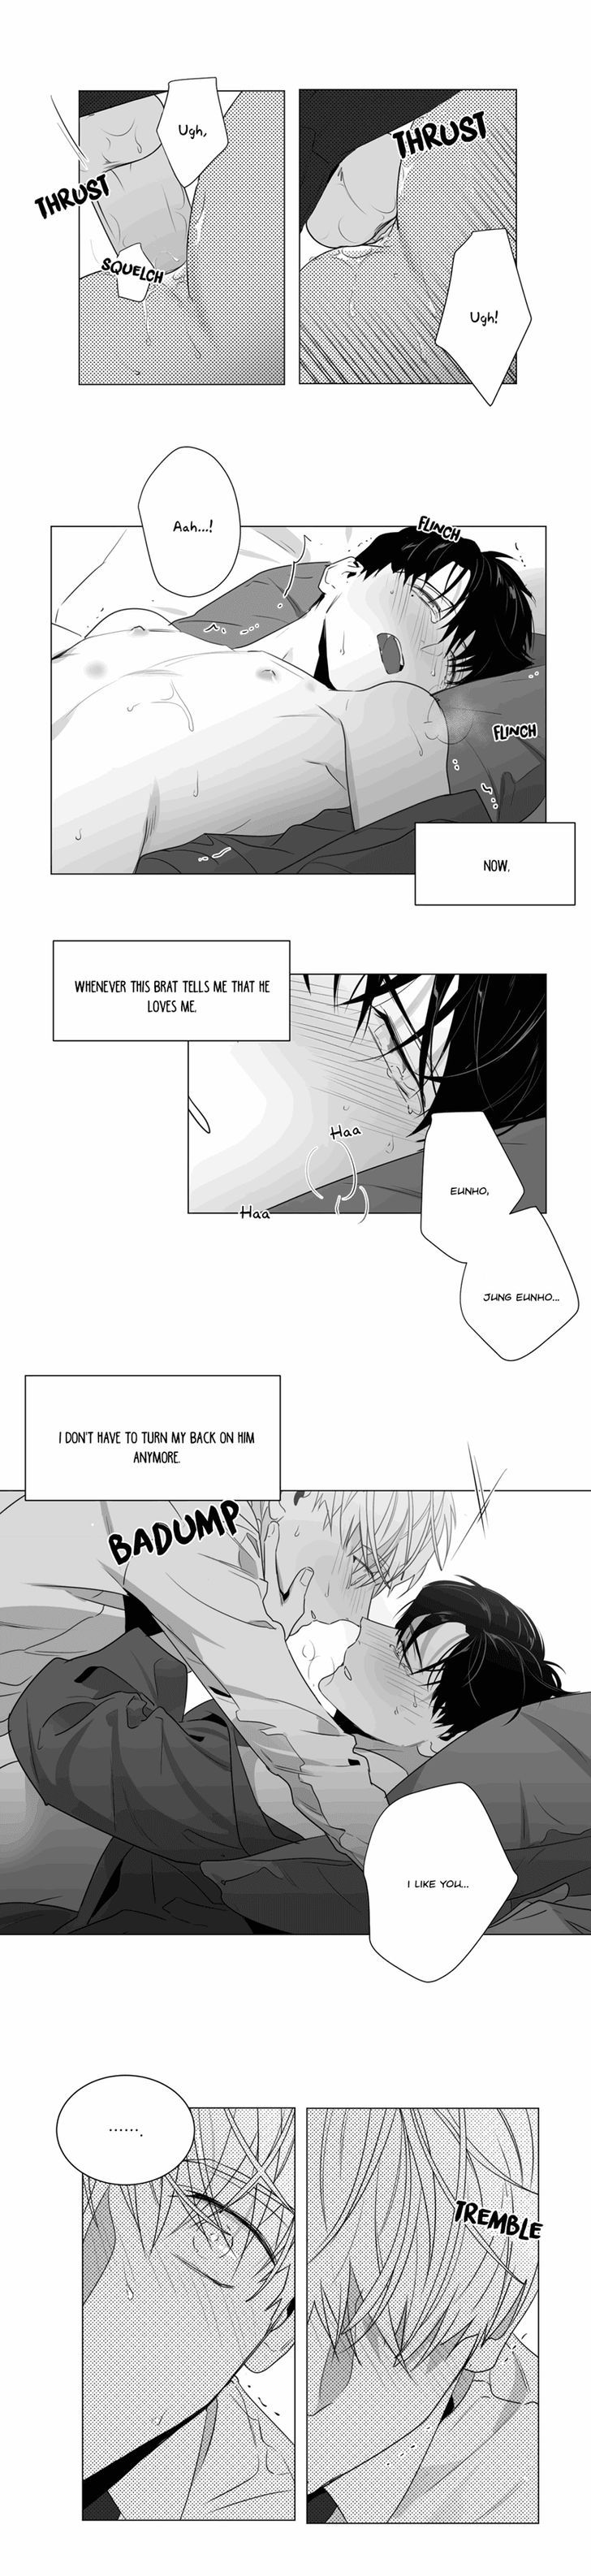 Lover Boy (Lezhin) Chapter 034 page 13